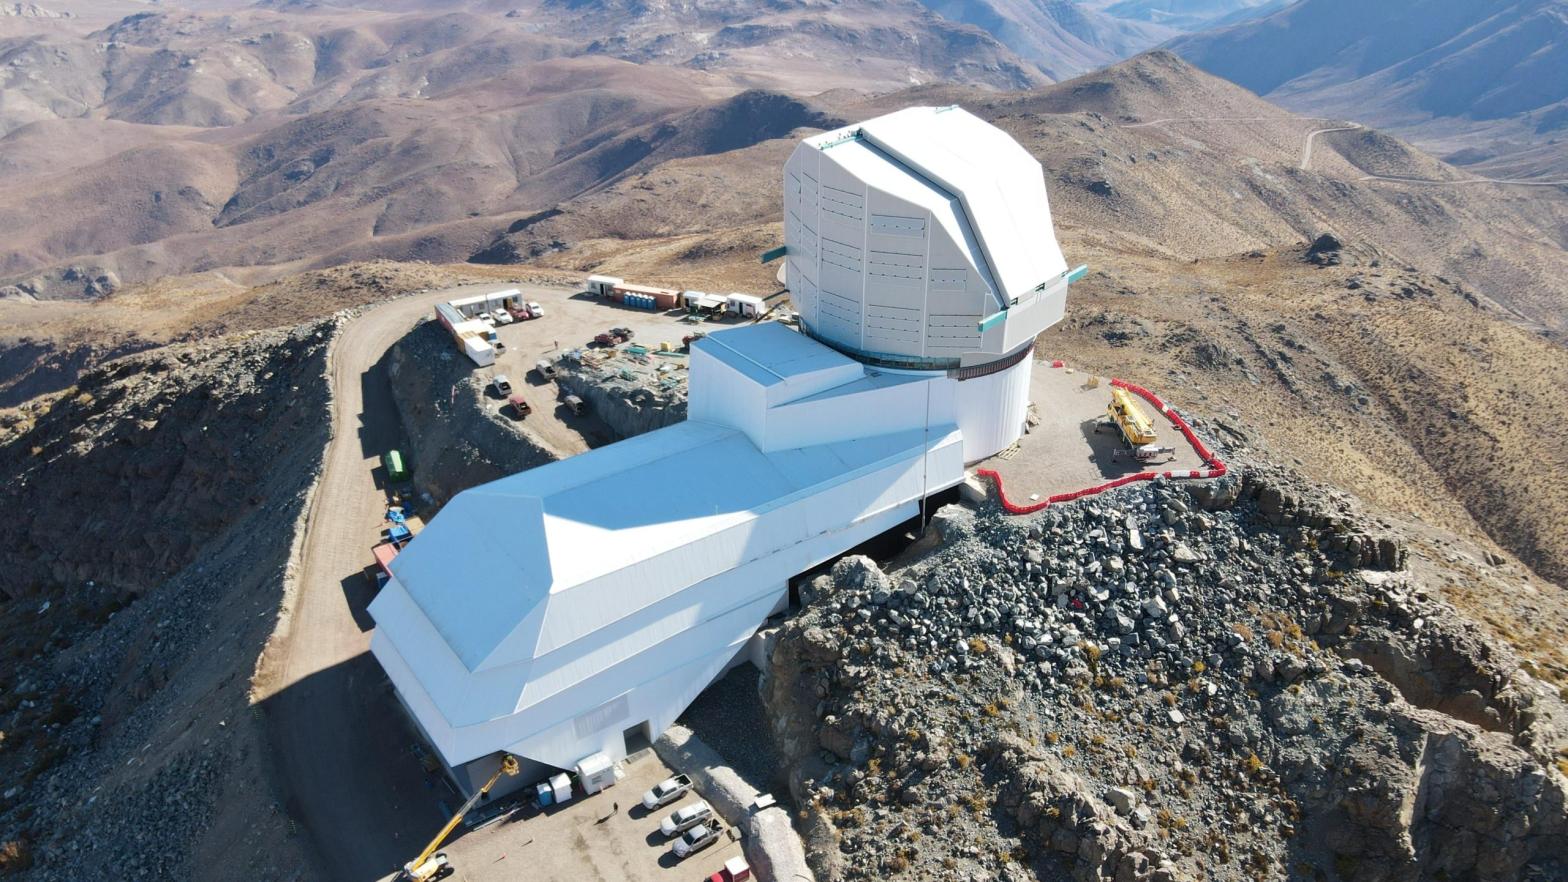 A drone photo shows the Vera Rubin Observatory under construction in Chile in July 2021. (Photo: Rubin Obs/NSF/AURA)